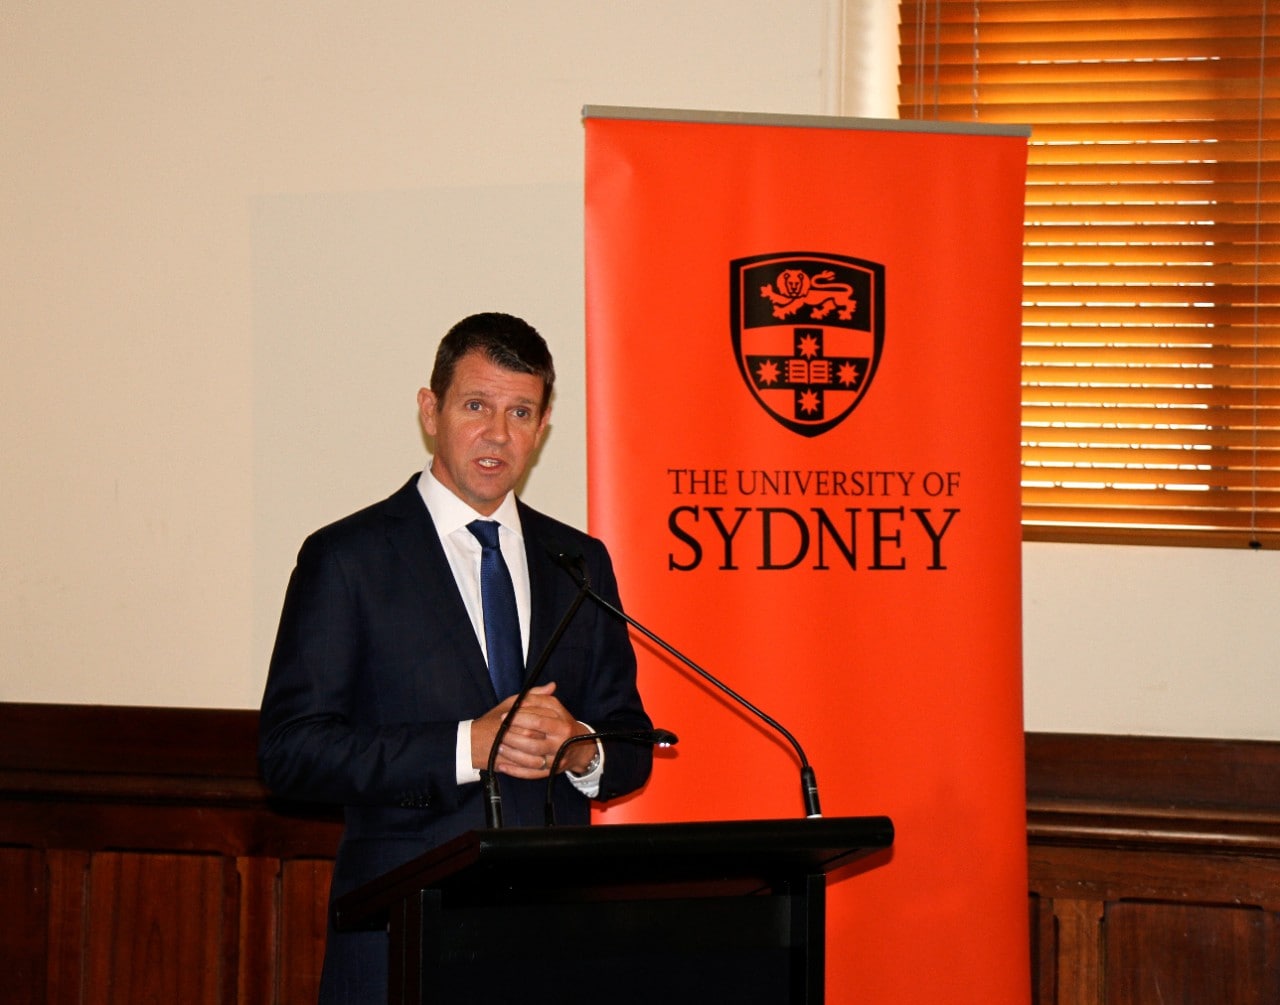 NSW Premier Mike Baird at the University of Sydney